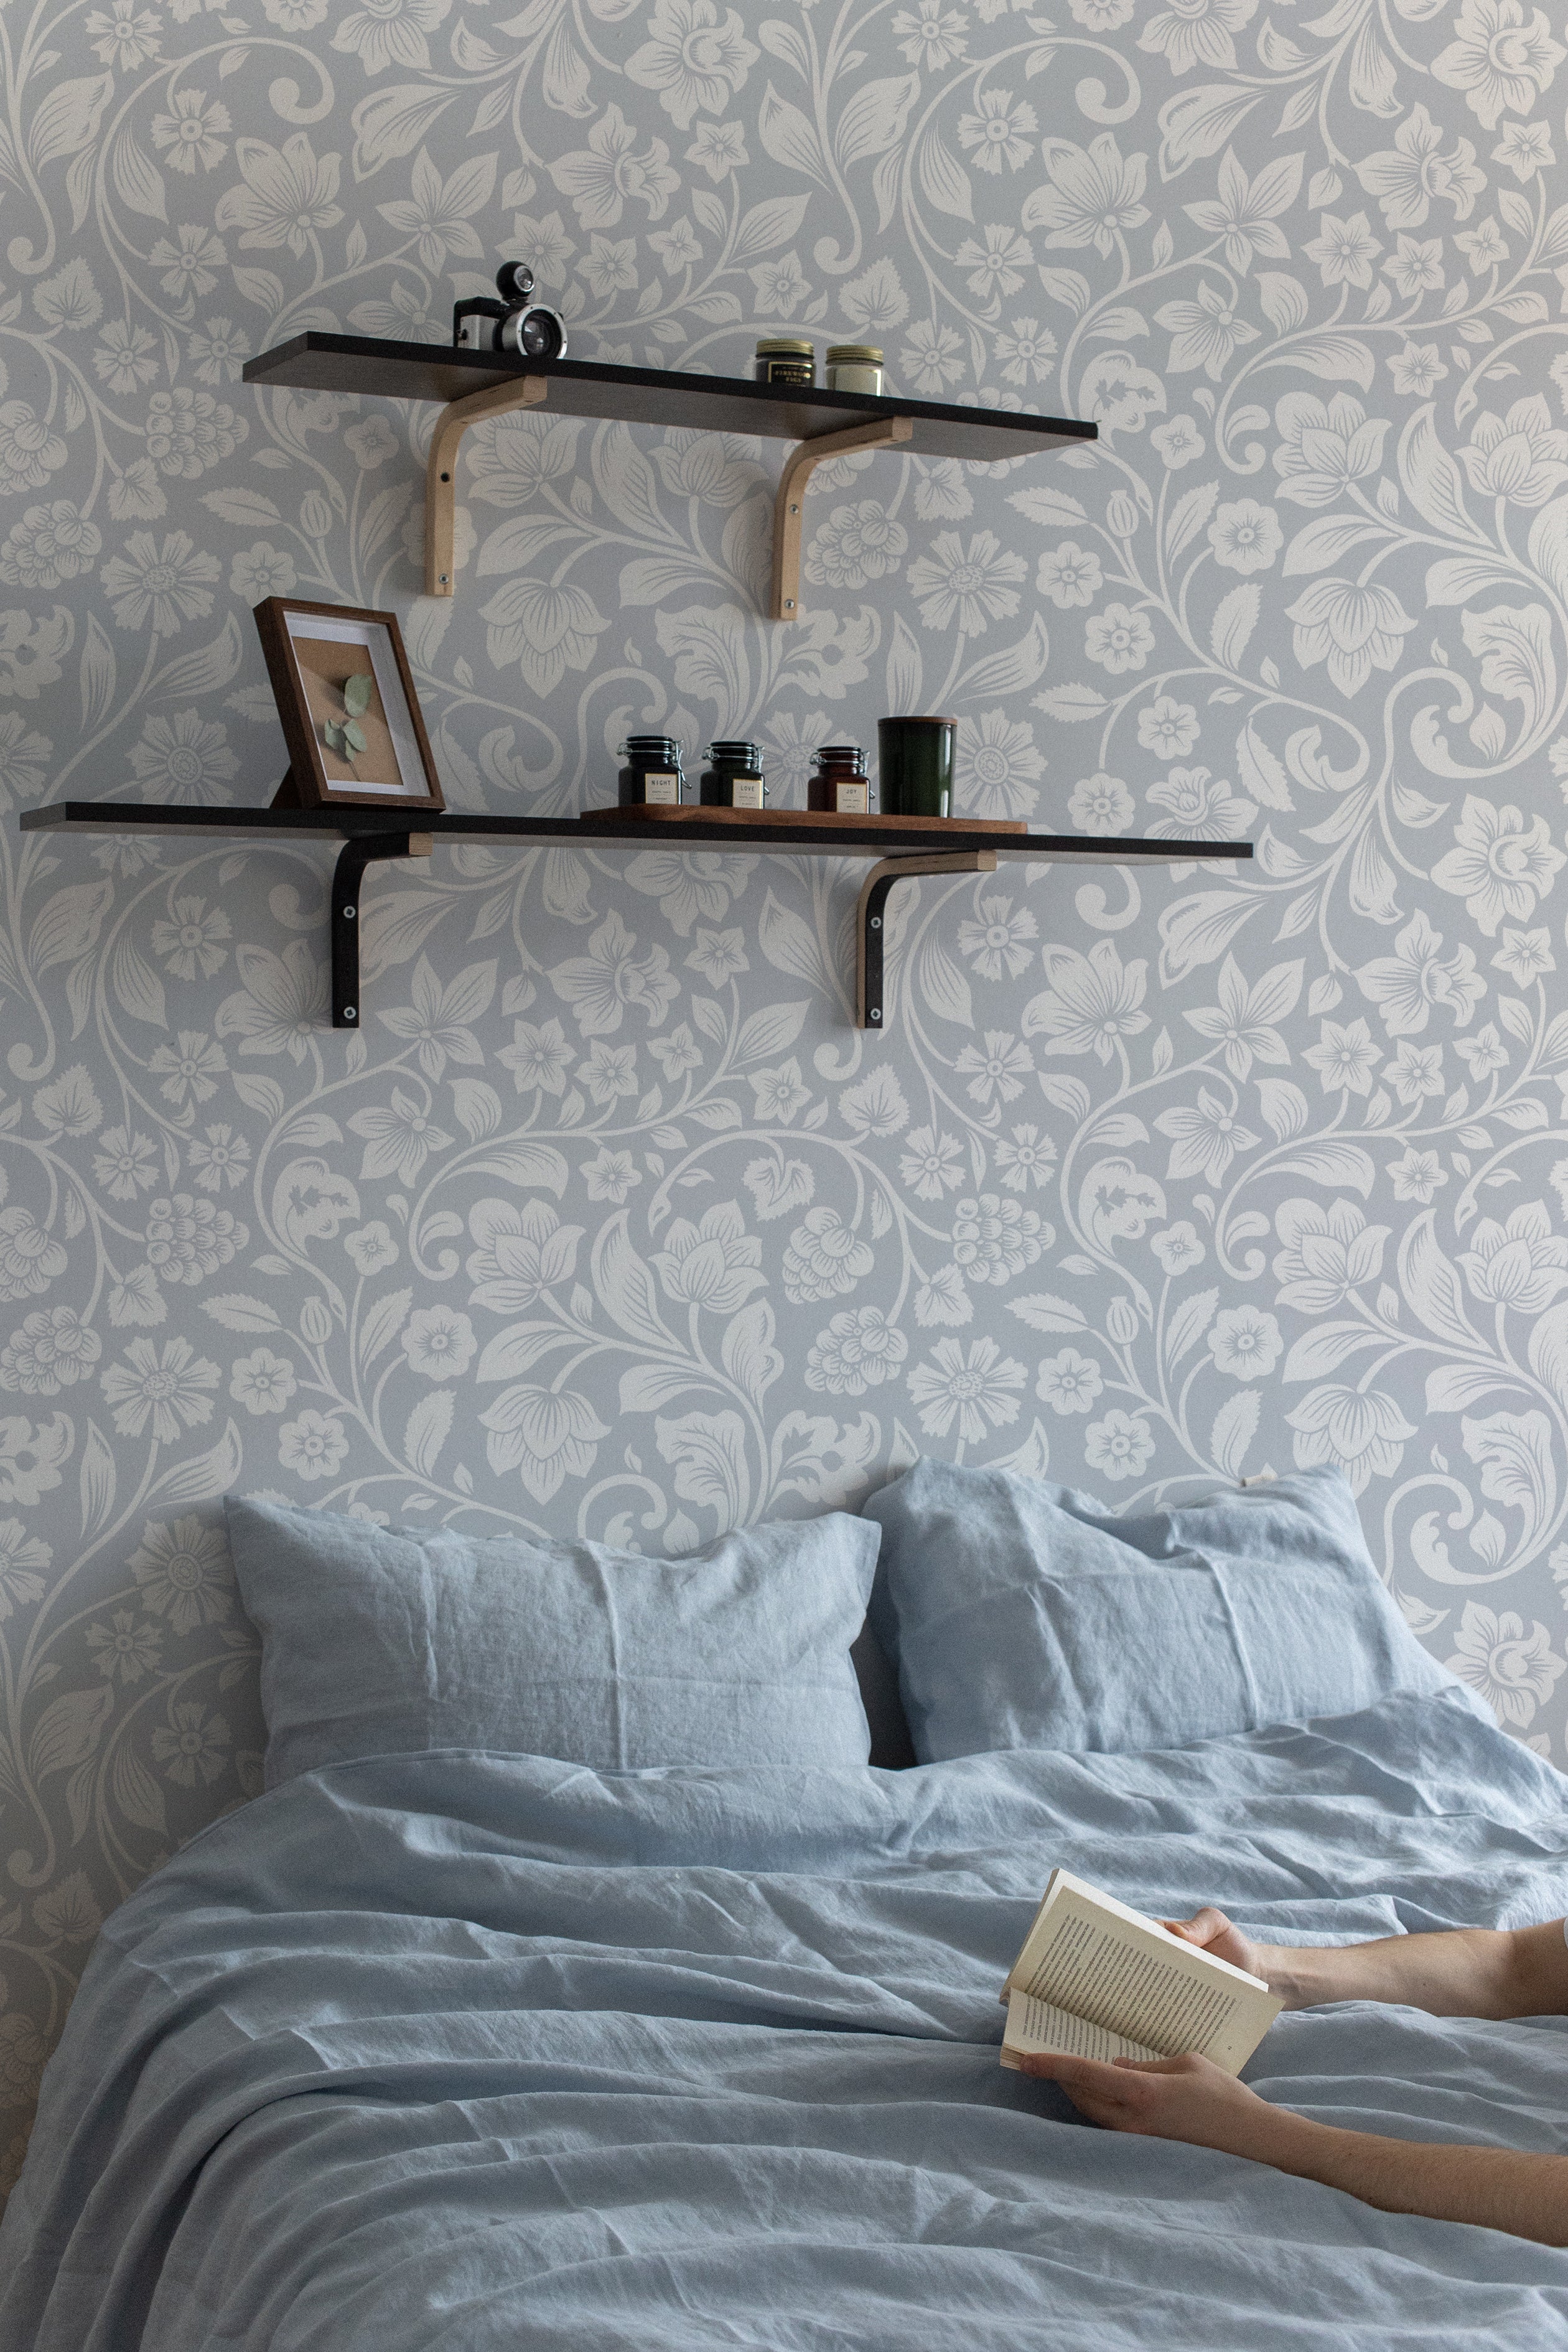 Faded Blue Vintage Floral Wallpaper - 75" used in a cozy bedroom setting with floating shelves and blue bed linens, highlighting the elegant floral pattern.